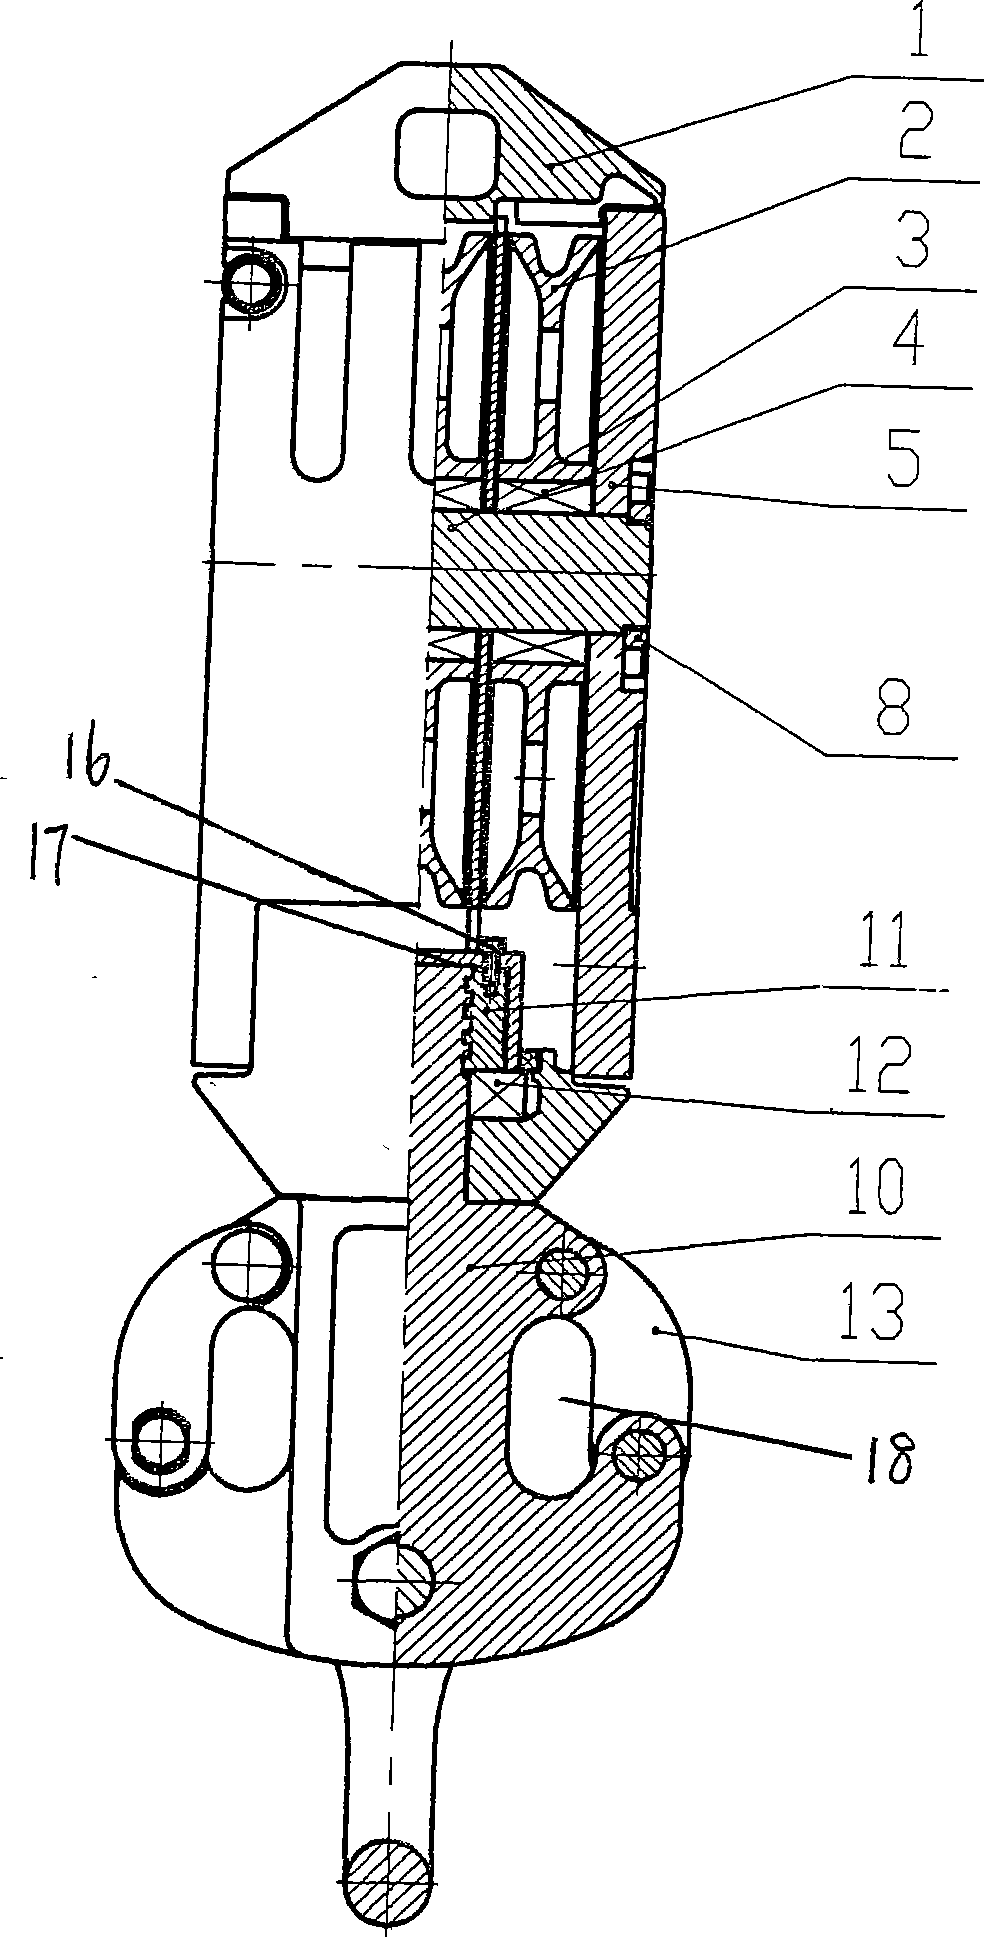 Hook block assembly for well workover